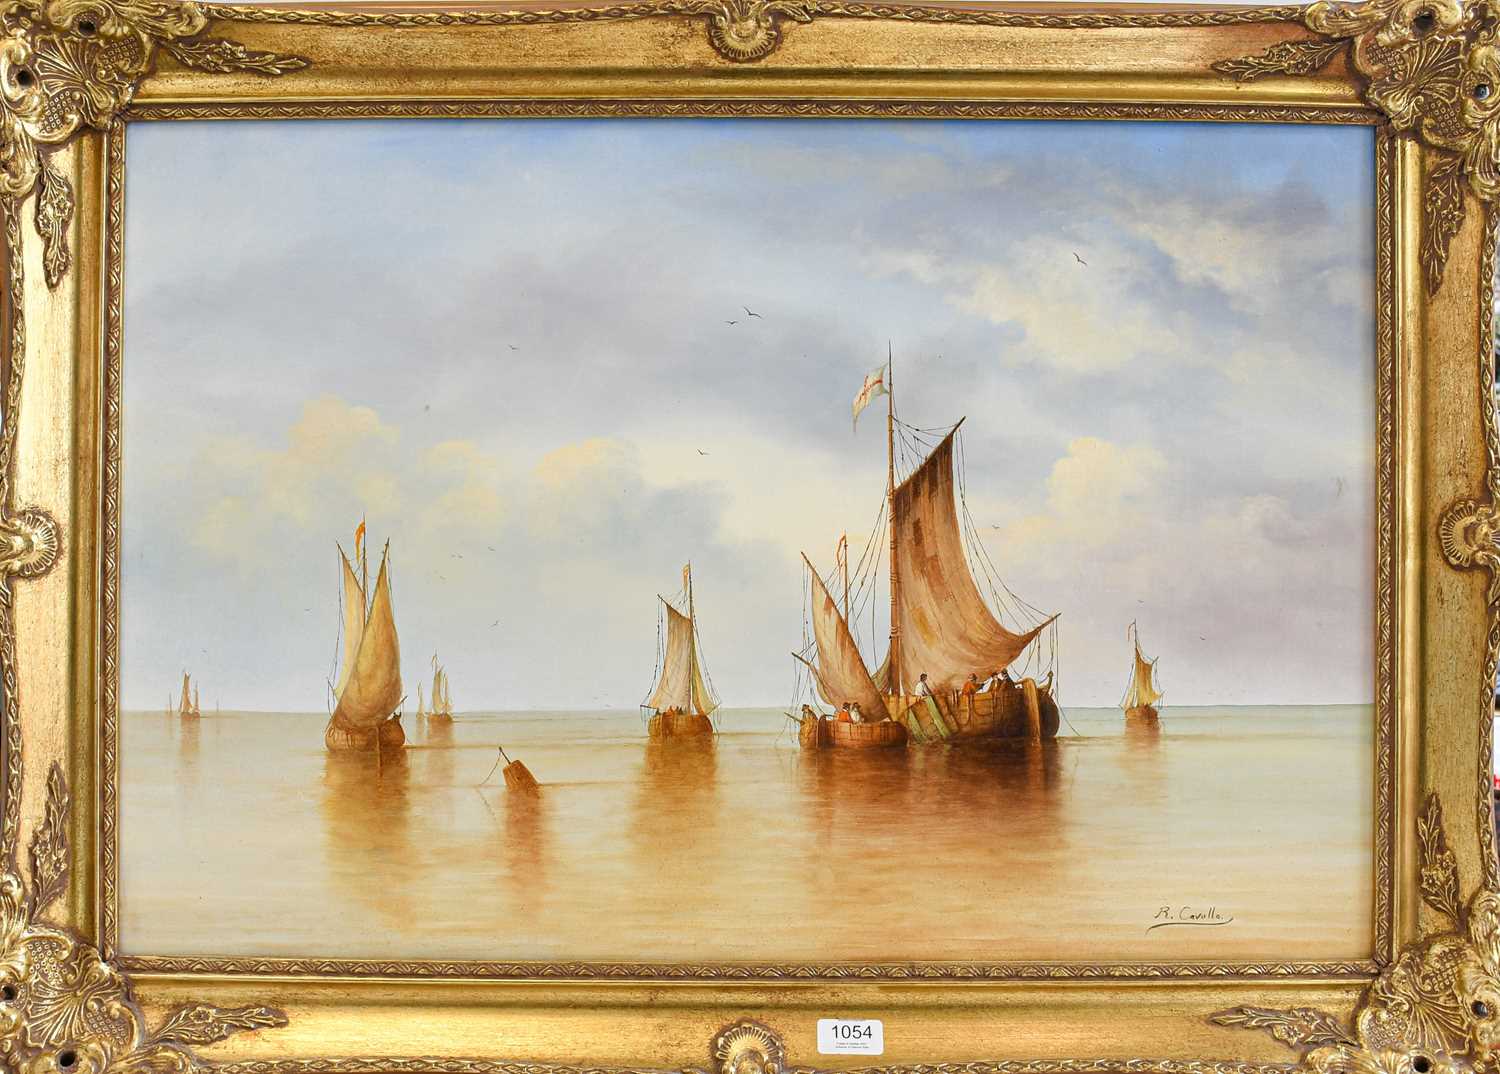 R Cavalla (20th century) fishing boats on the sea in the 19th century style, signed oil on